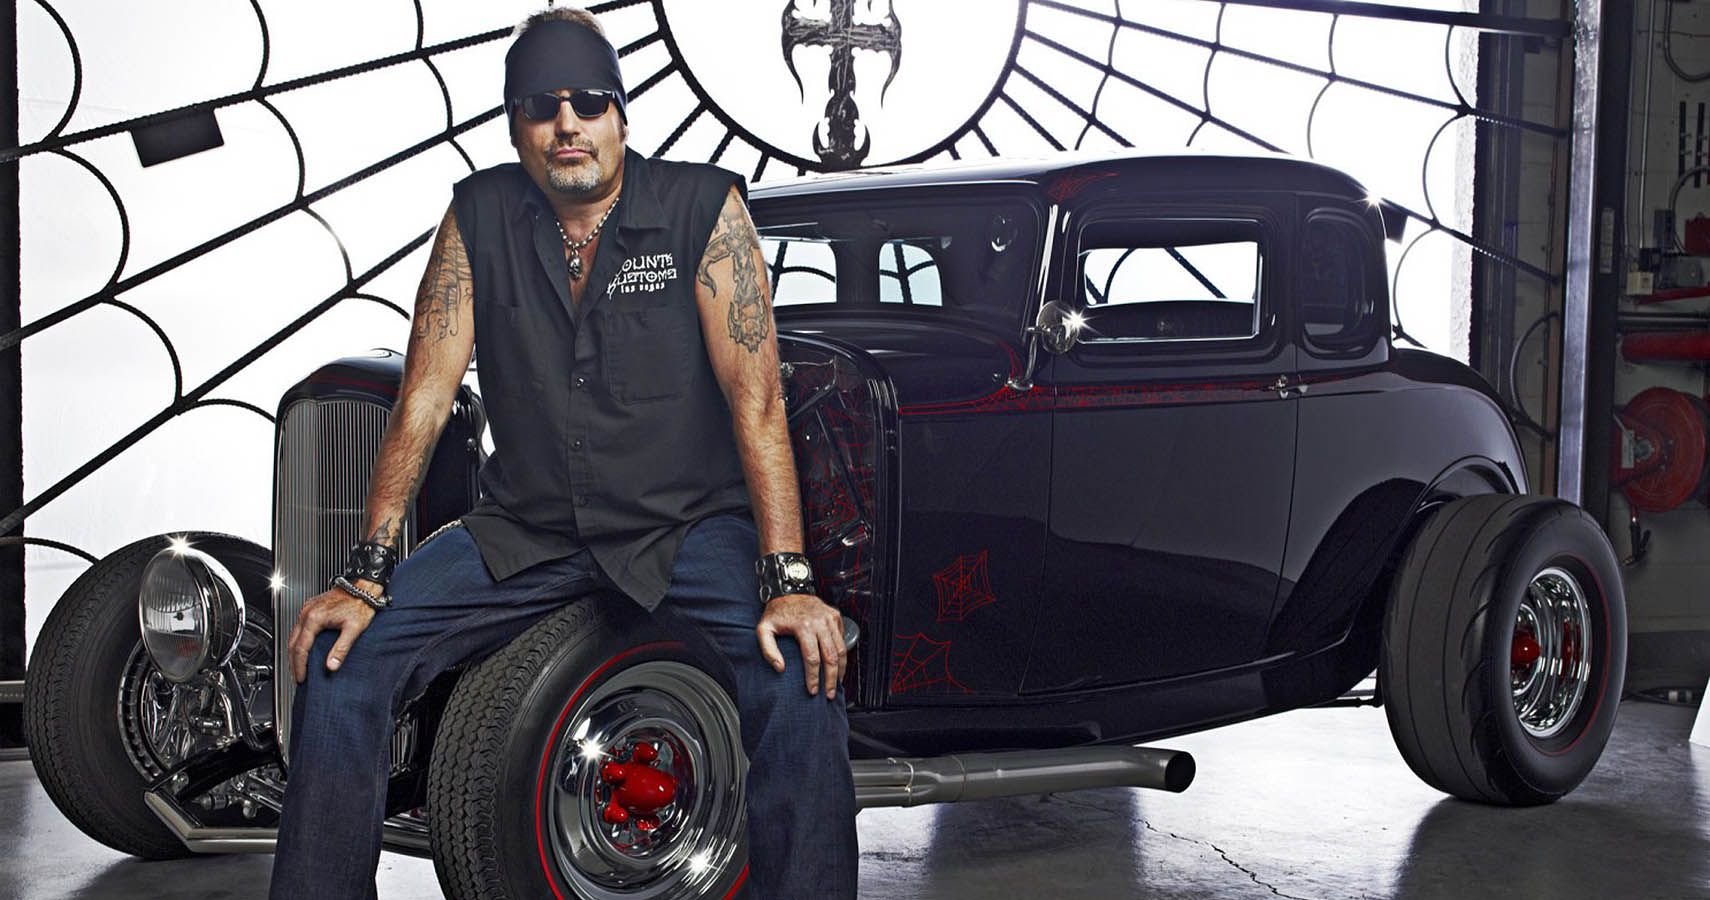 Counting Cars: Pawn Star Spin-Off